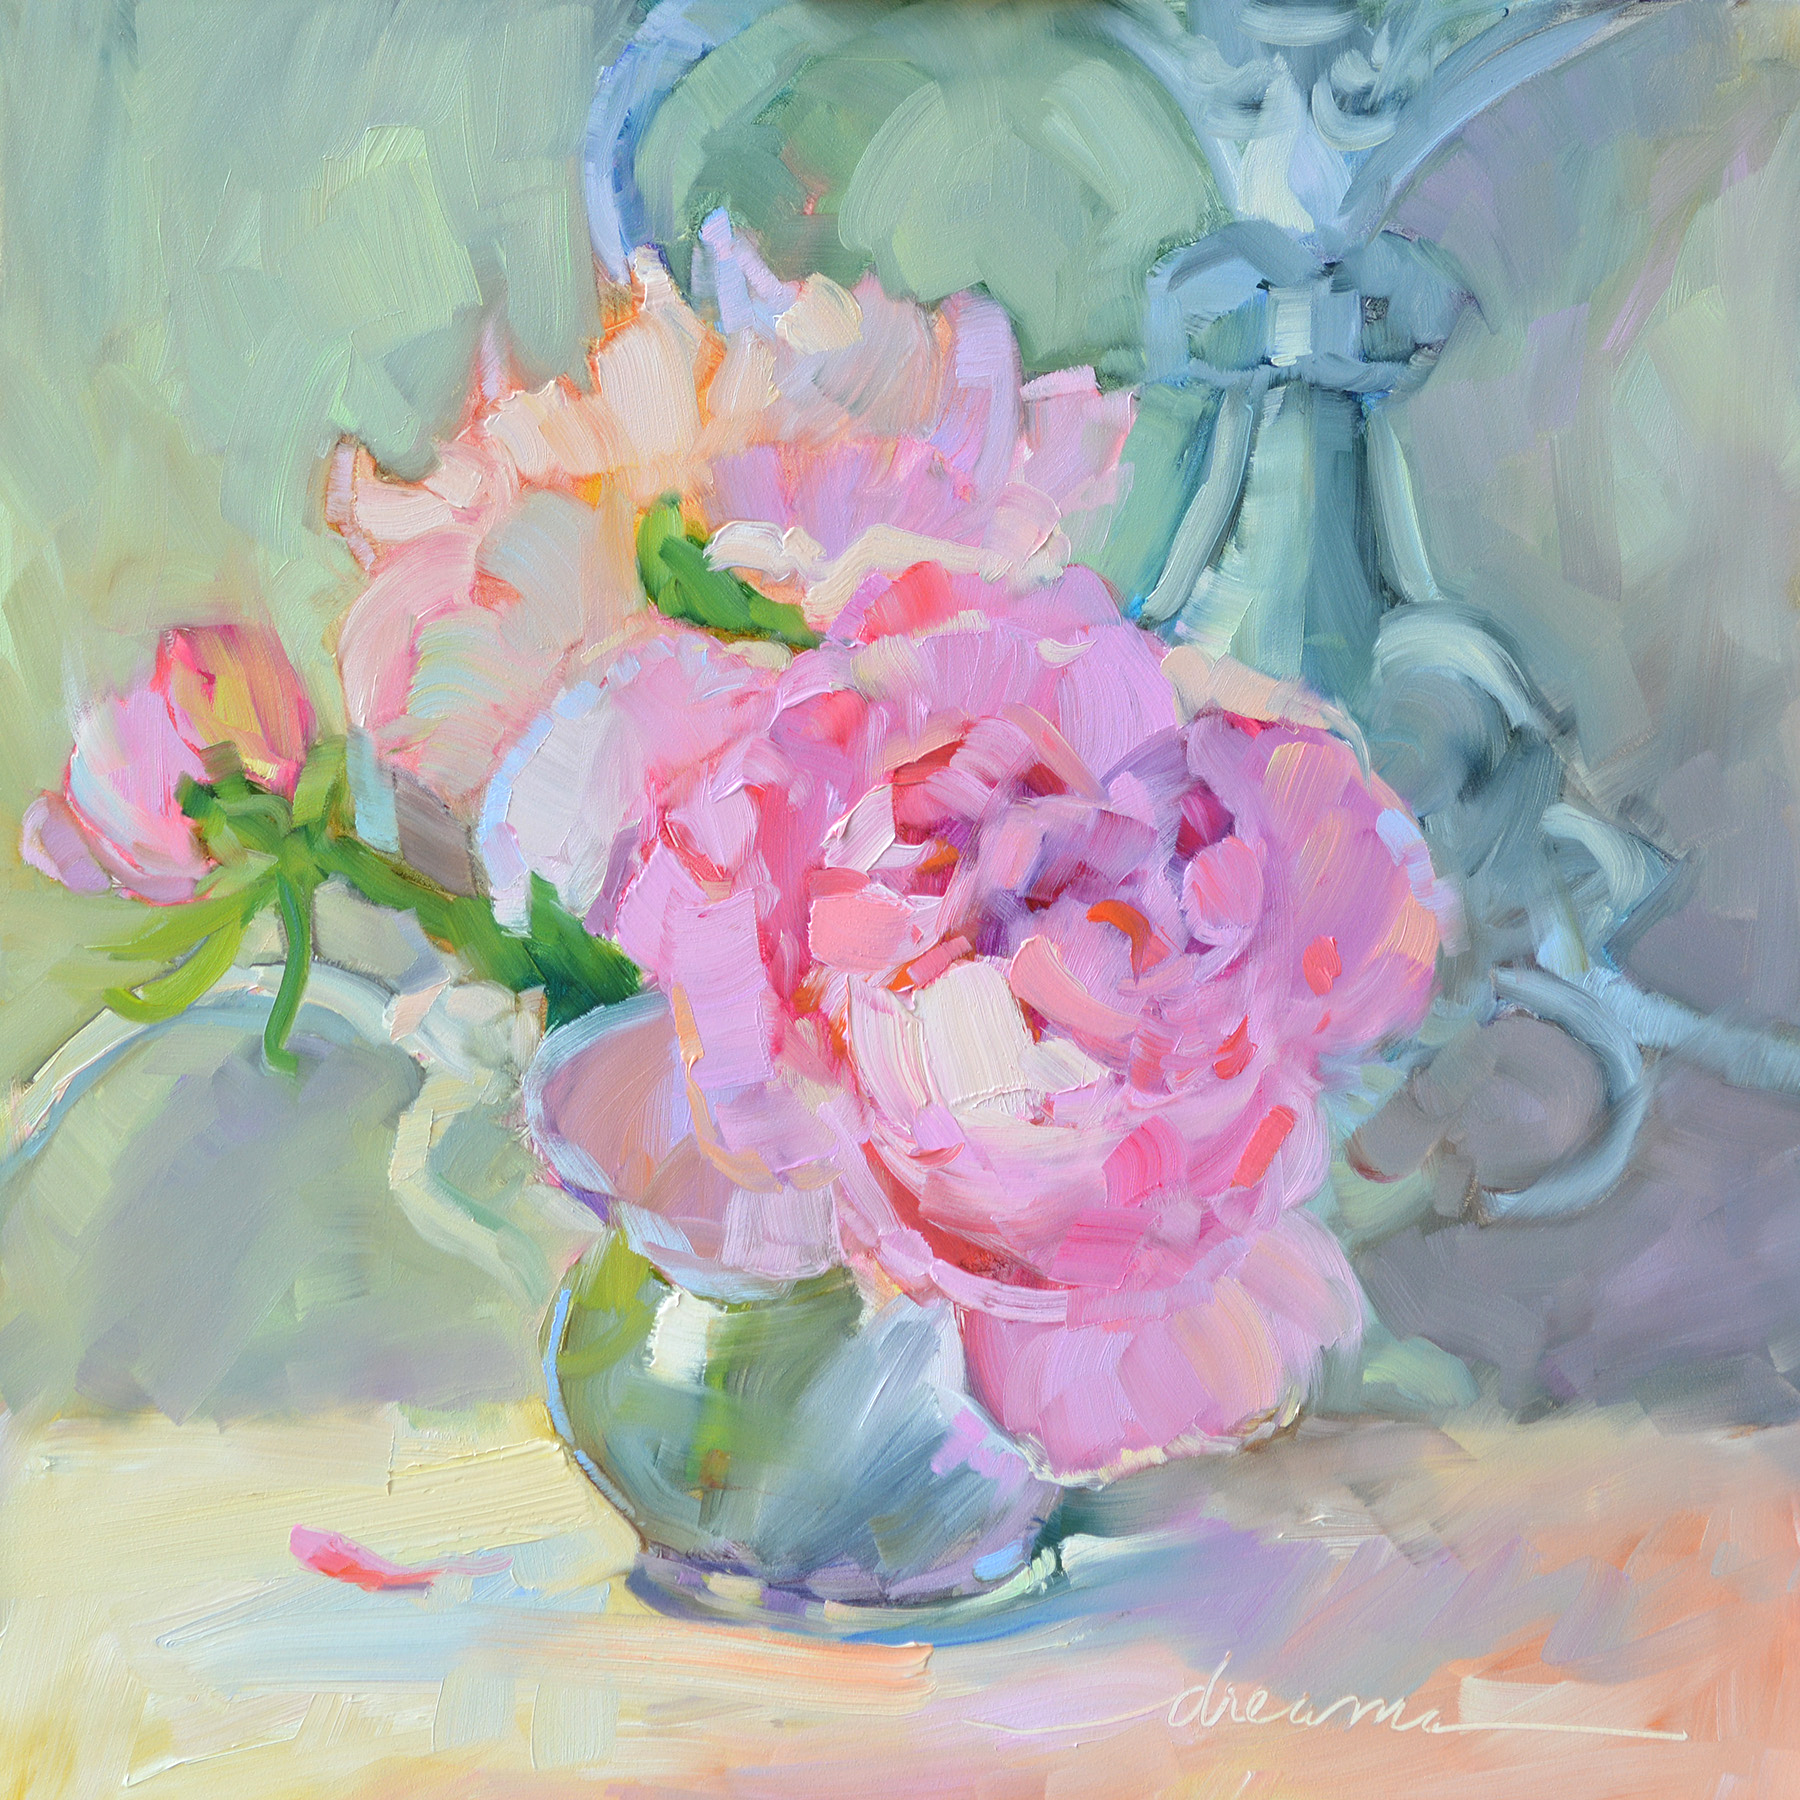 Cottage Peonies - Dreama Tolle Perry - https://dreamatolleperry.com/